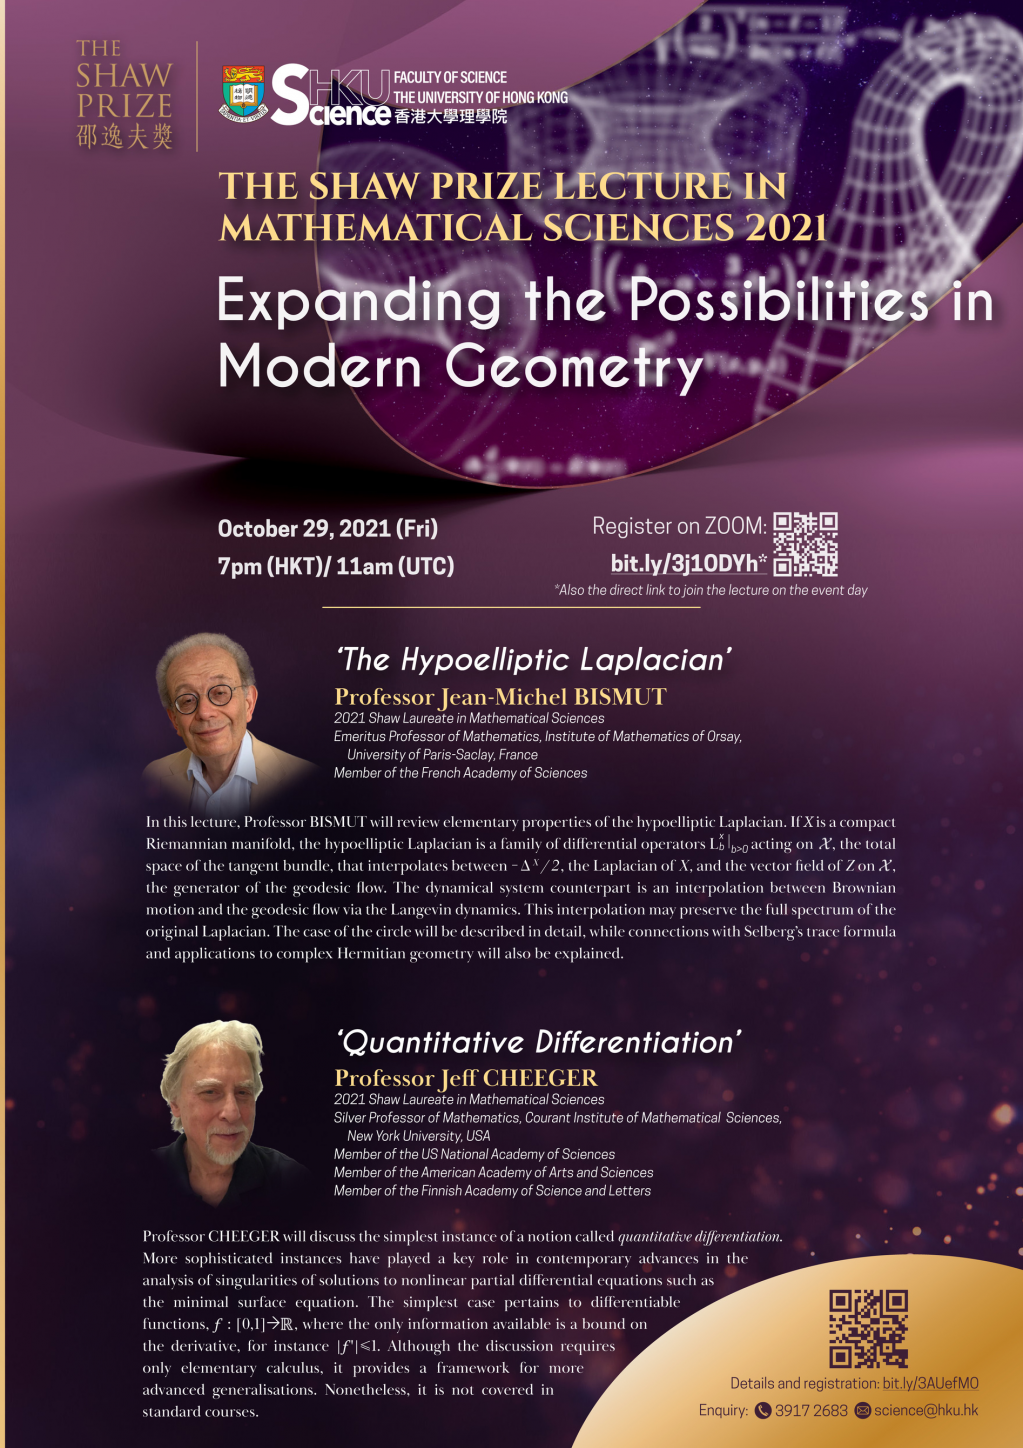 The Shaw Prize Lecture in Mathematical Sciences 2021